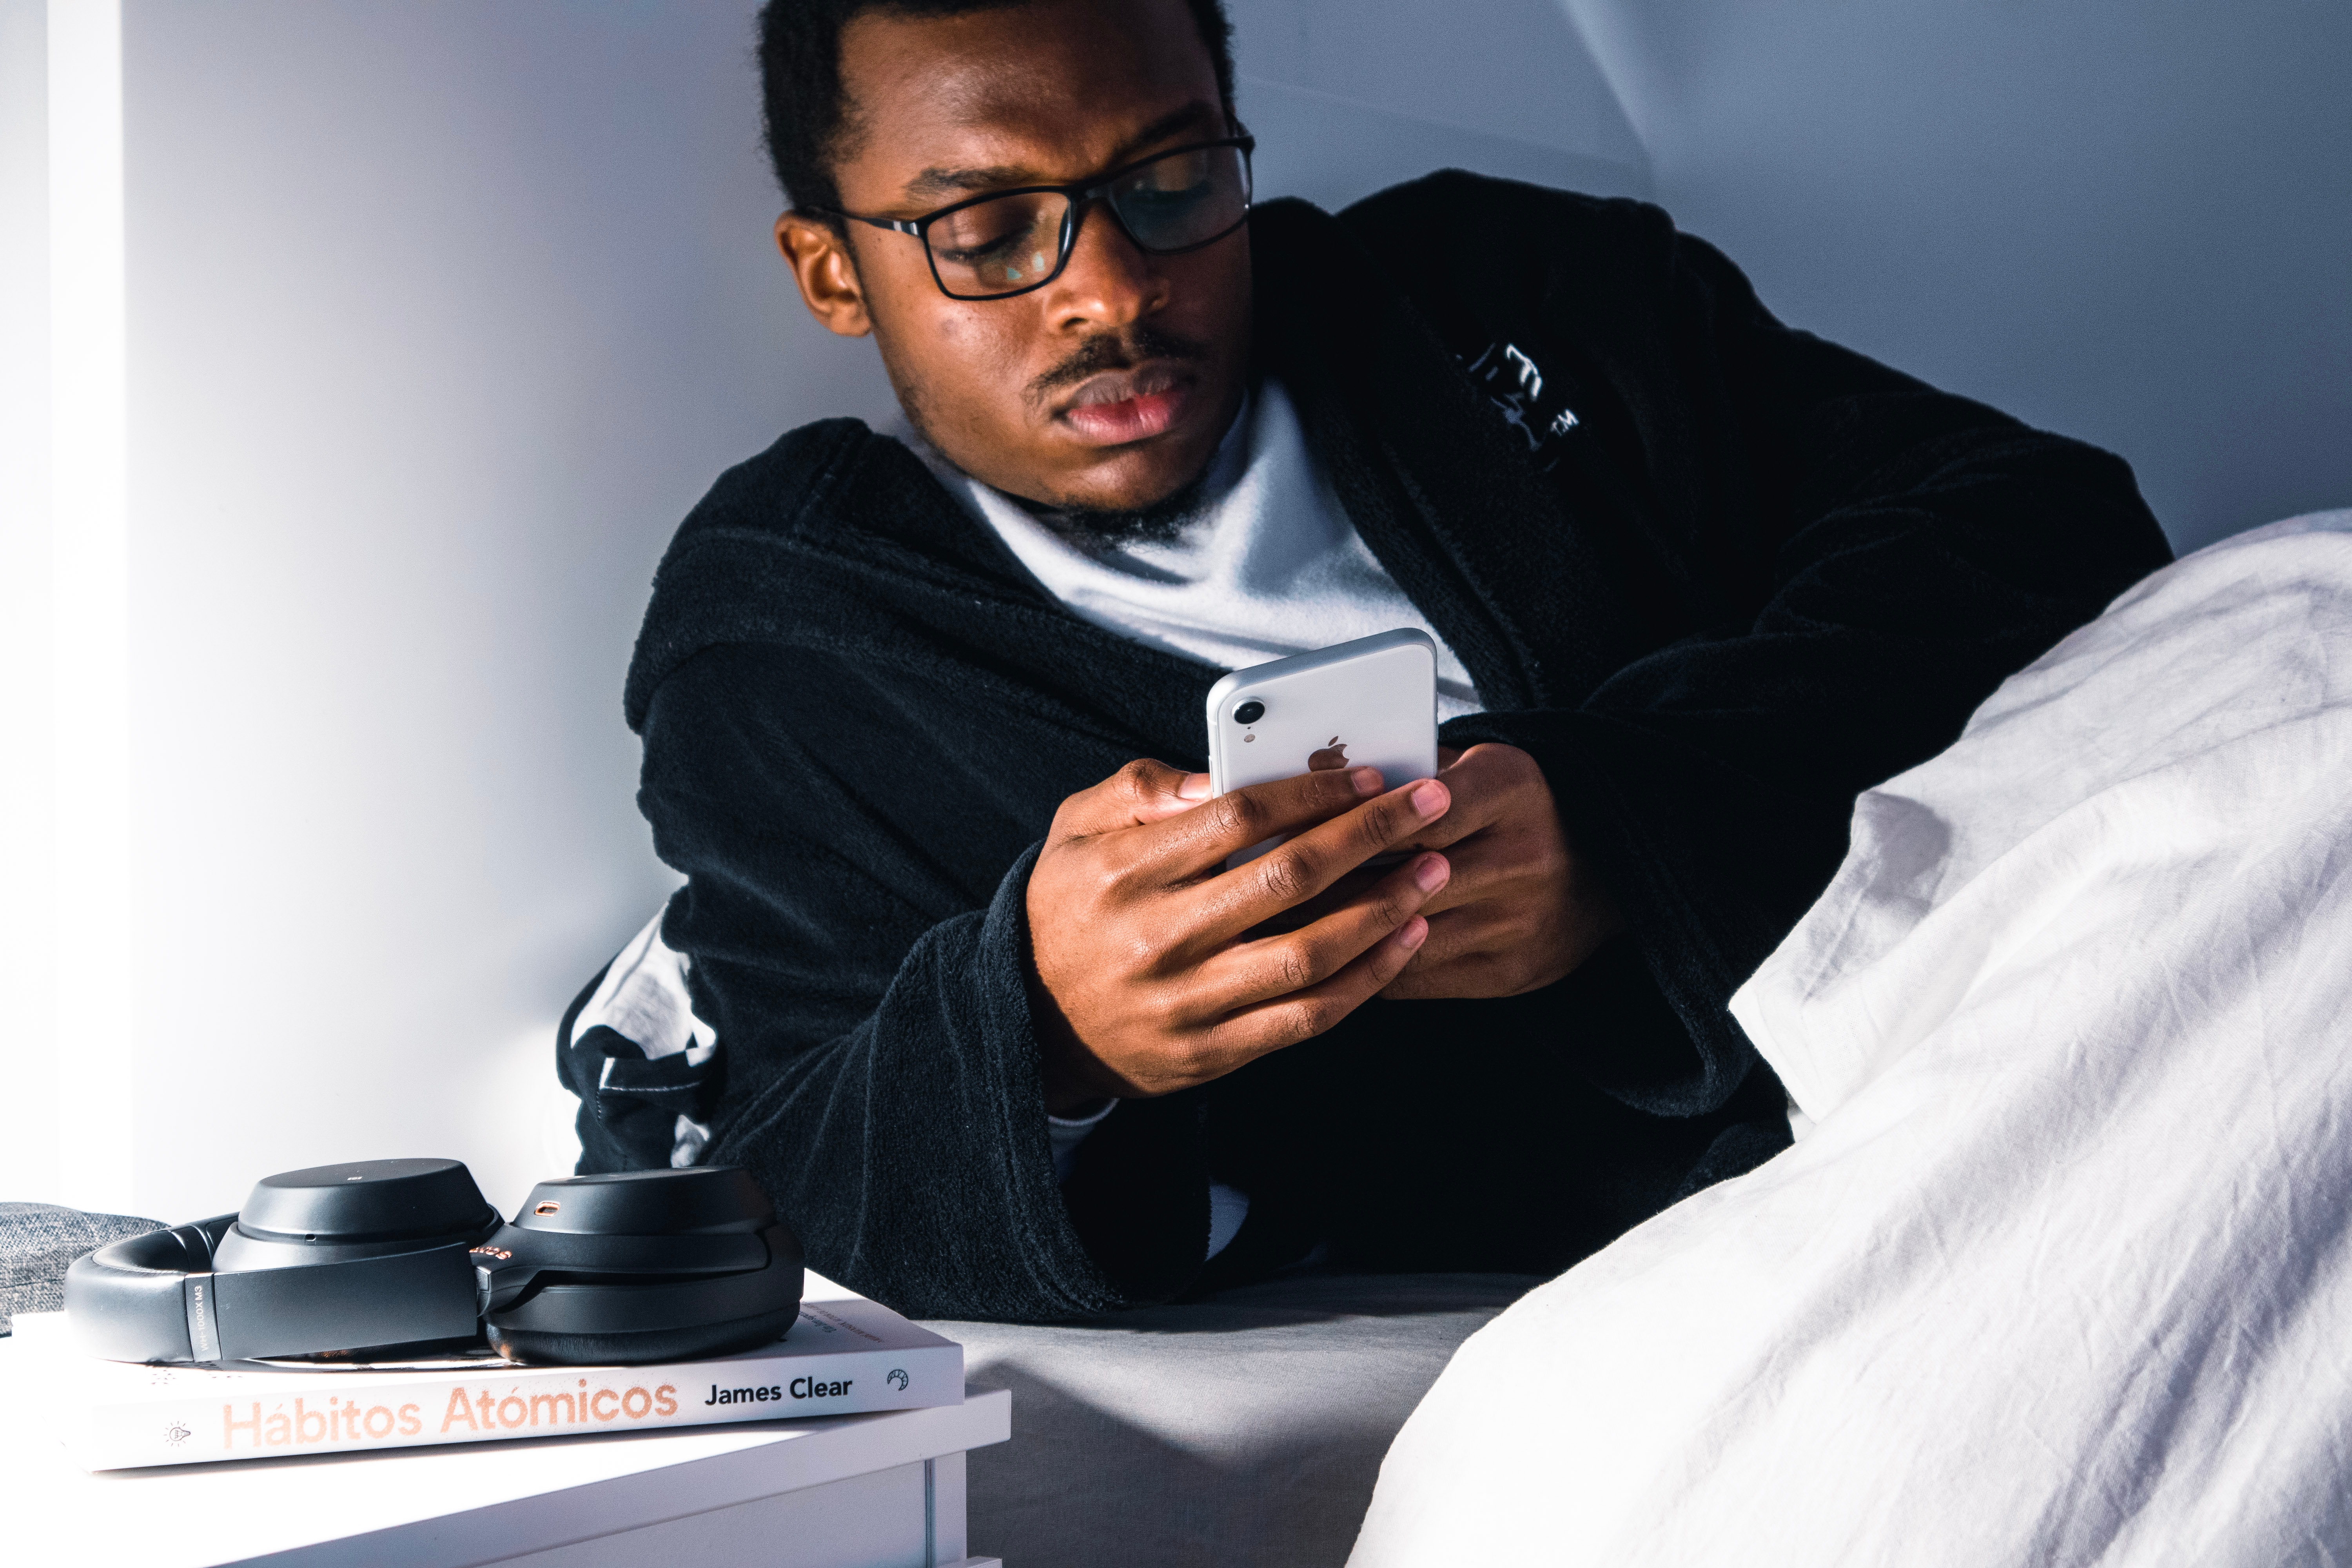 Man in bed looking at his cell phone.